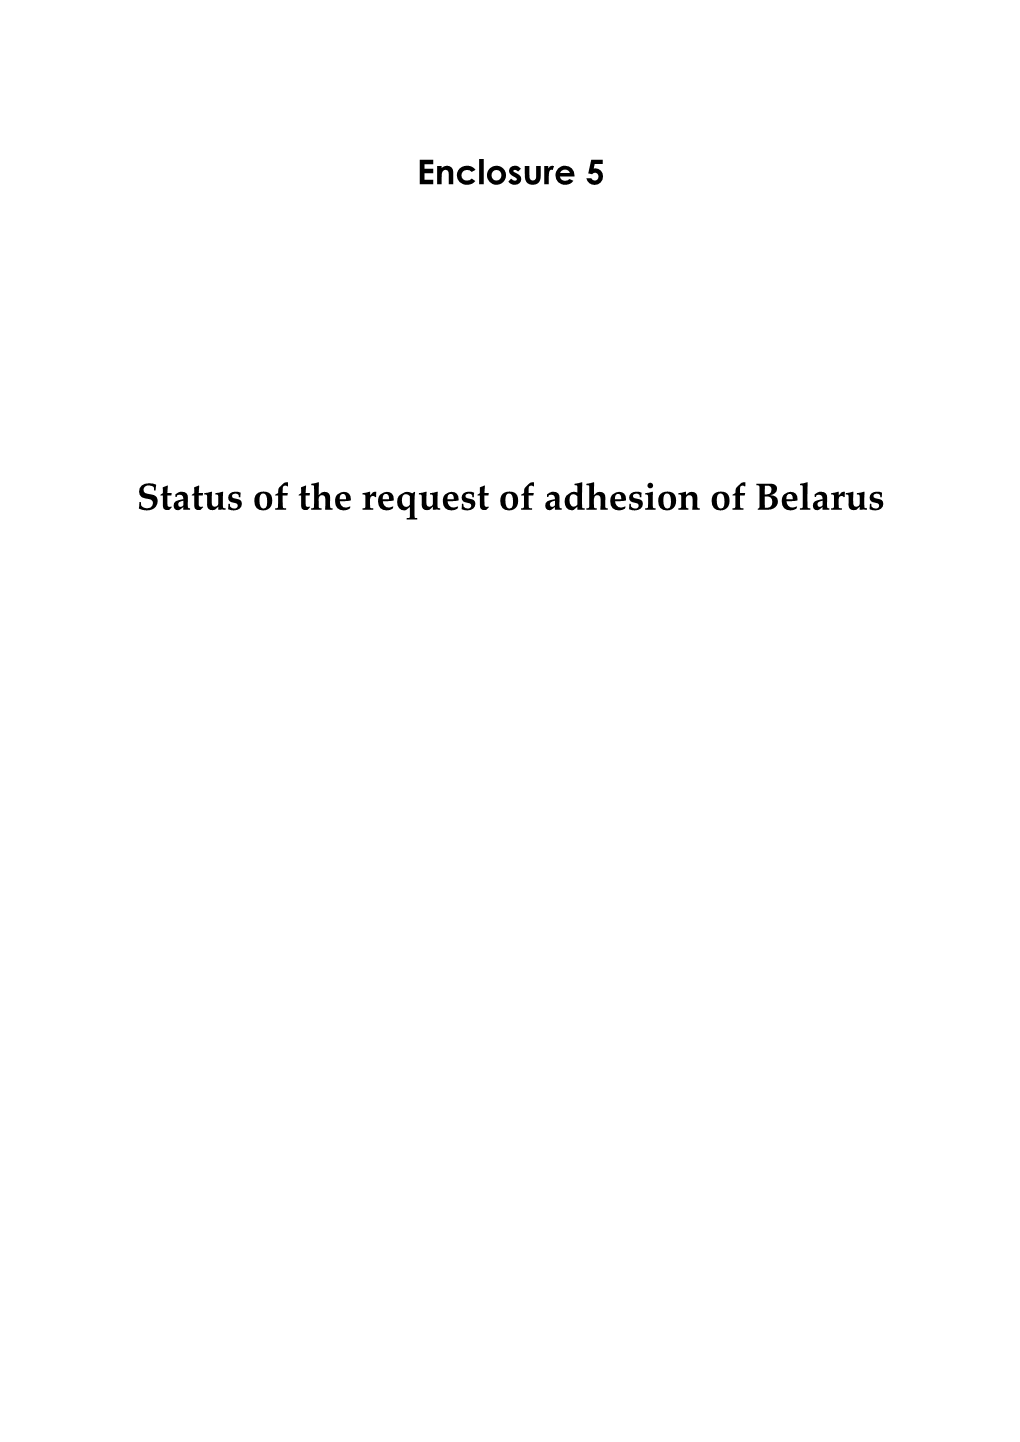 Status of the Request of Adhesion of Belarus